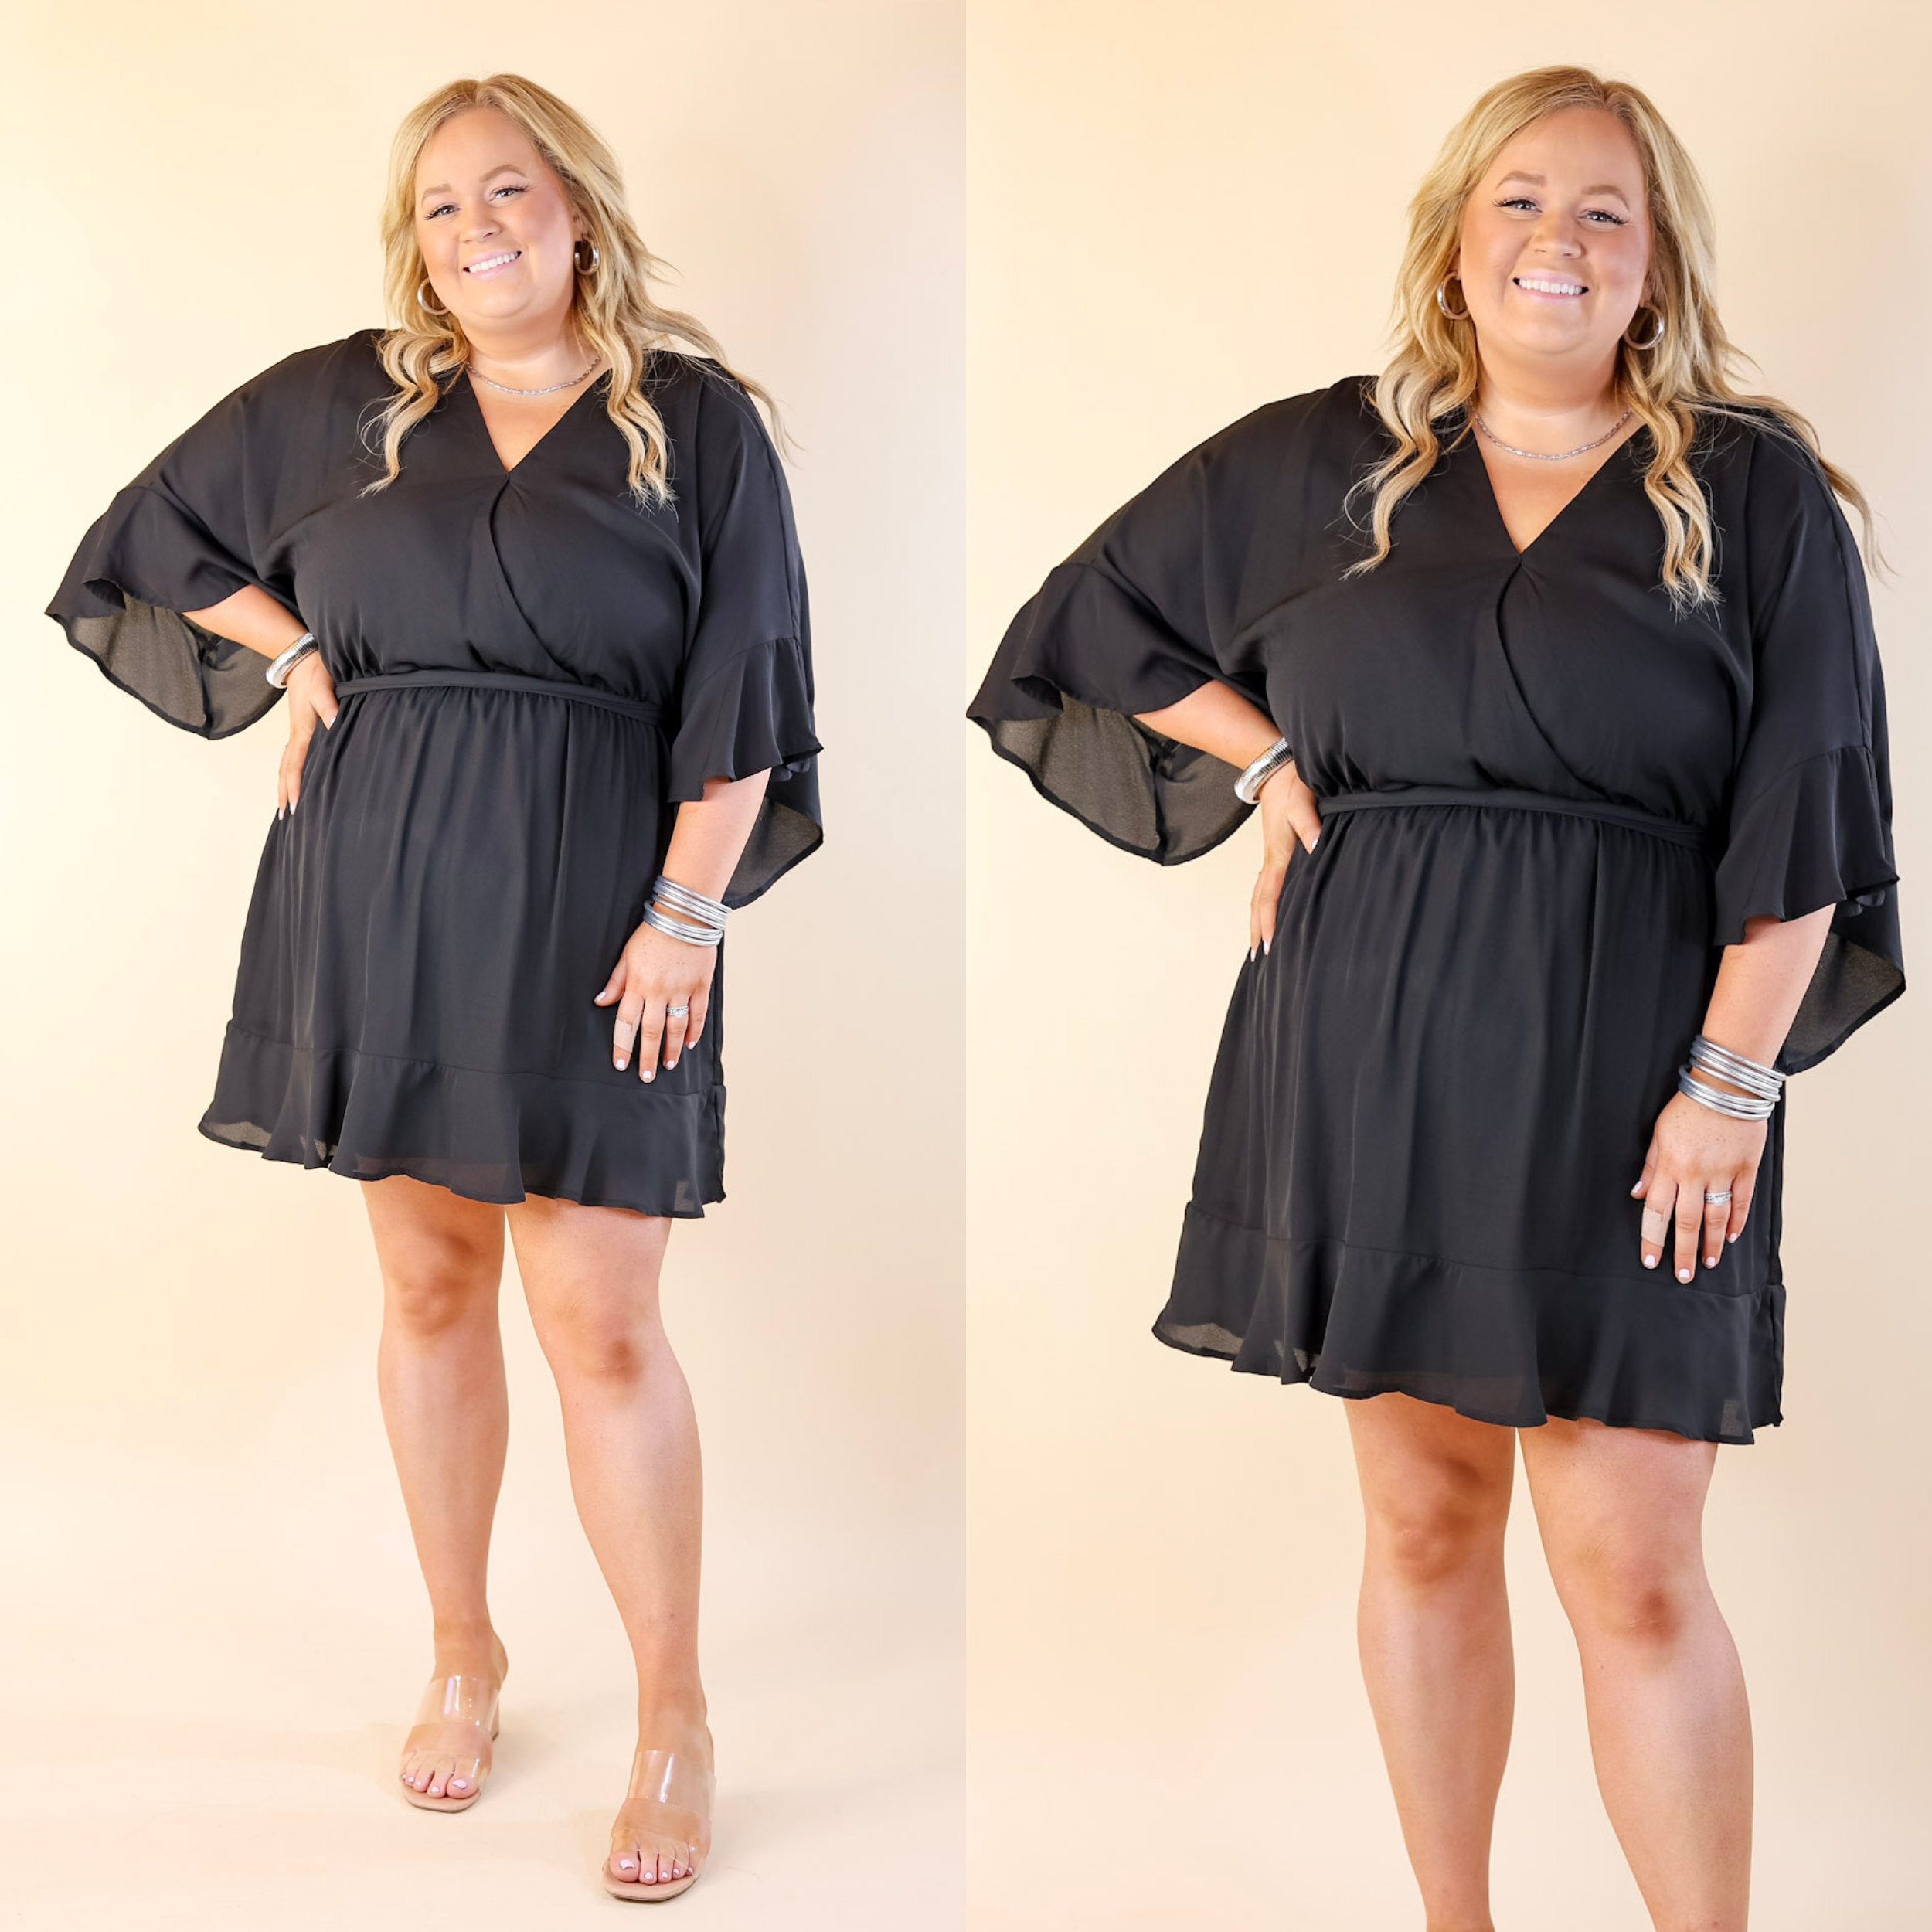 Super Chic Ruffle Sleeve V Neck Dress with Waist Tie in Black - Giddy Up Glamour Boutique